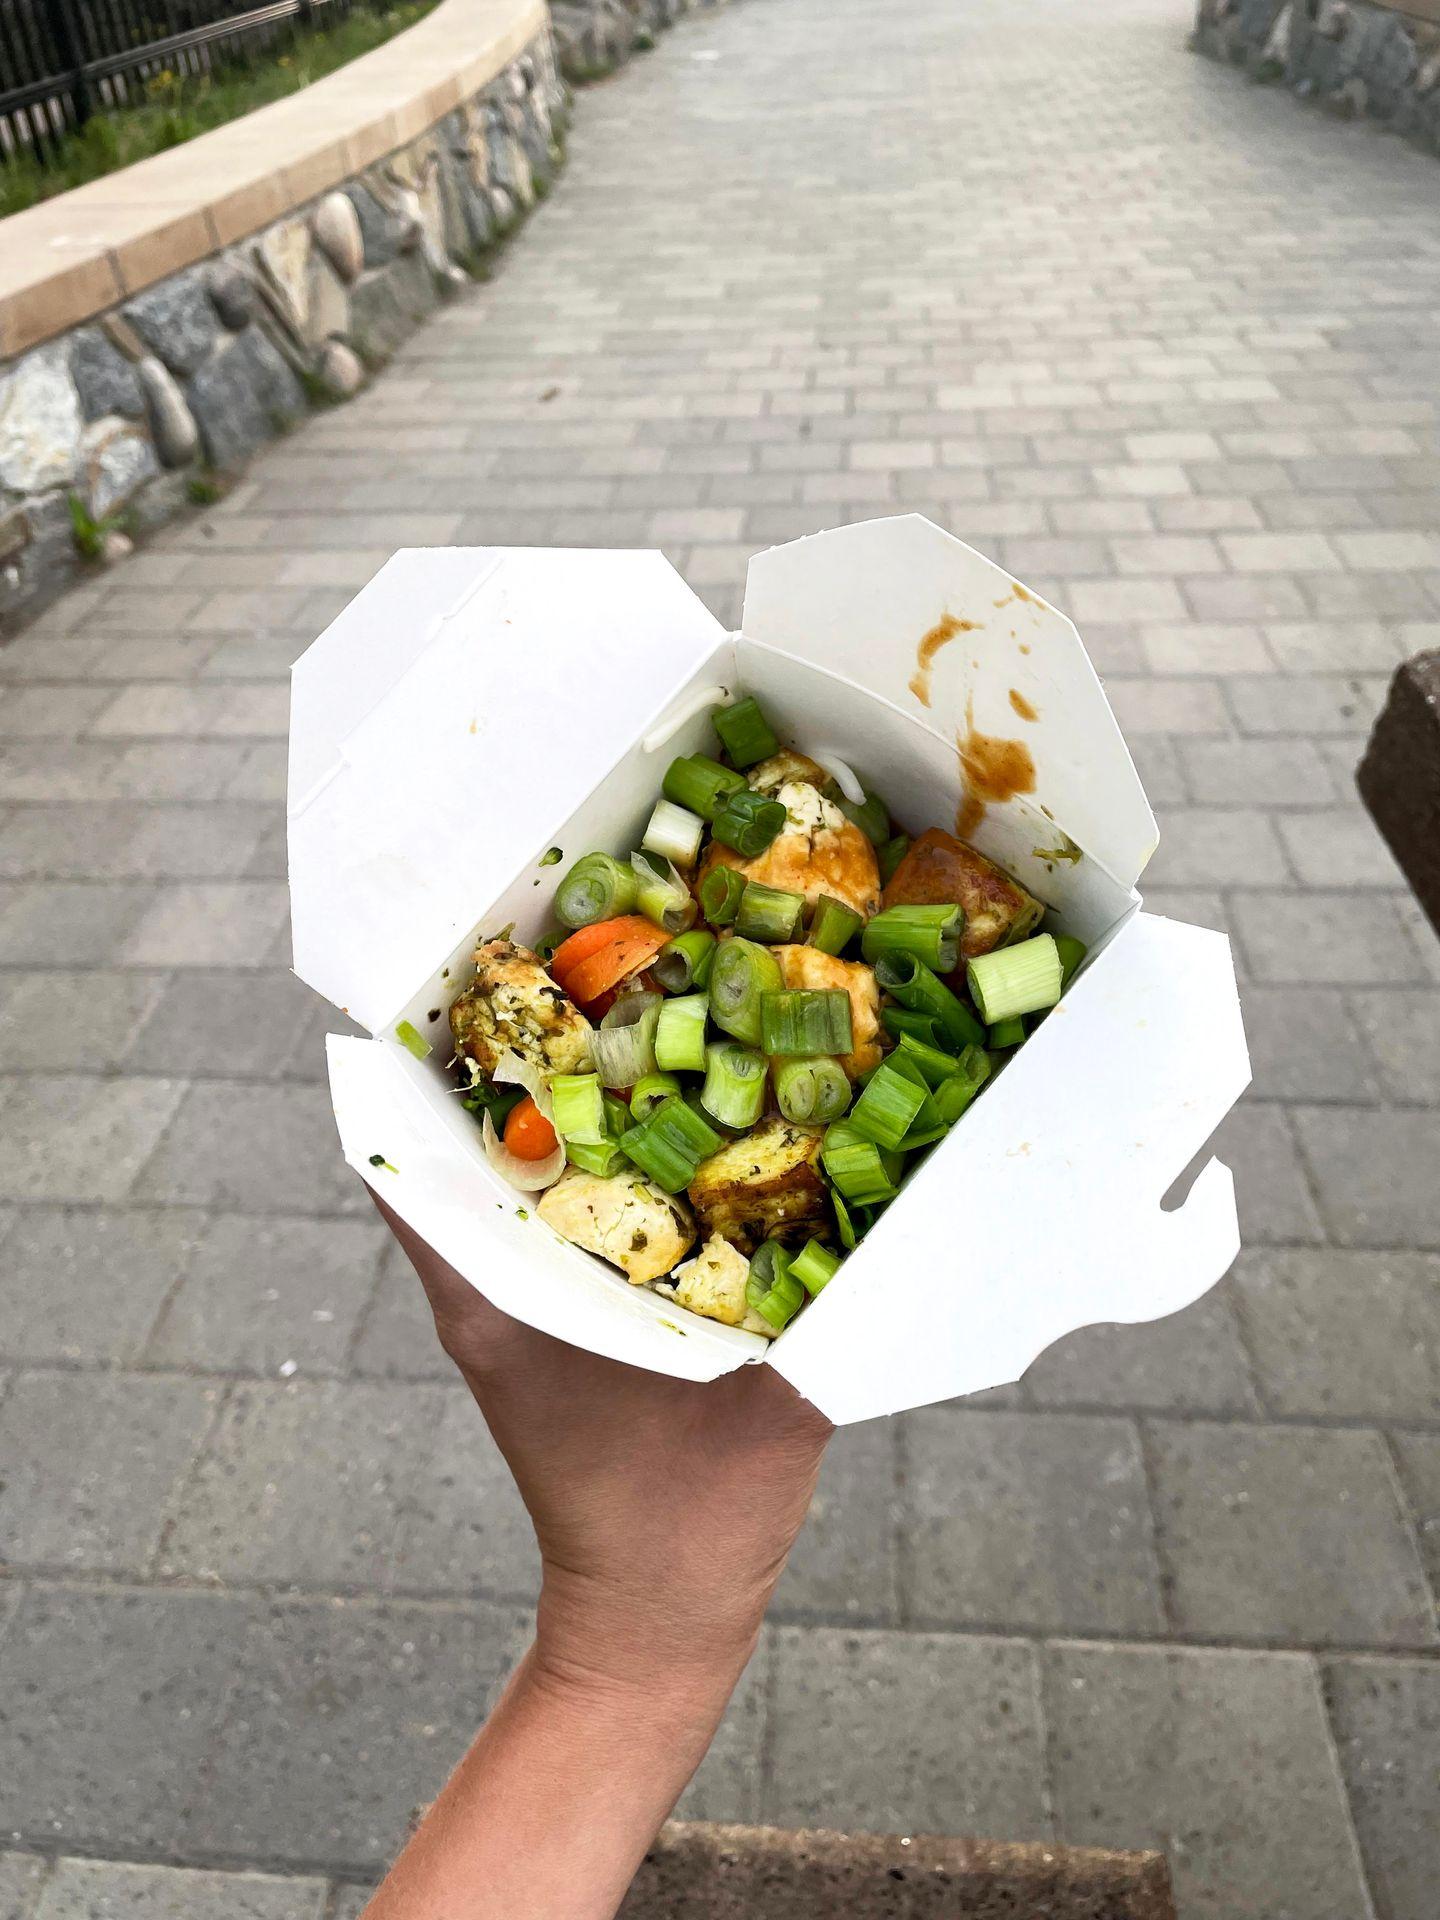 A to-go container of wok noodles from the Canyon Eatery.